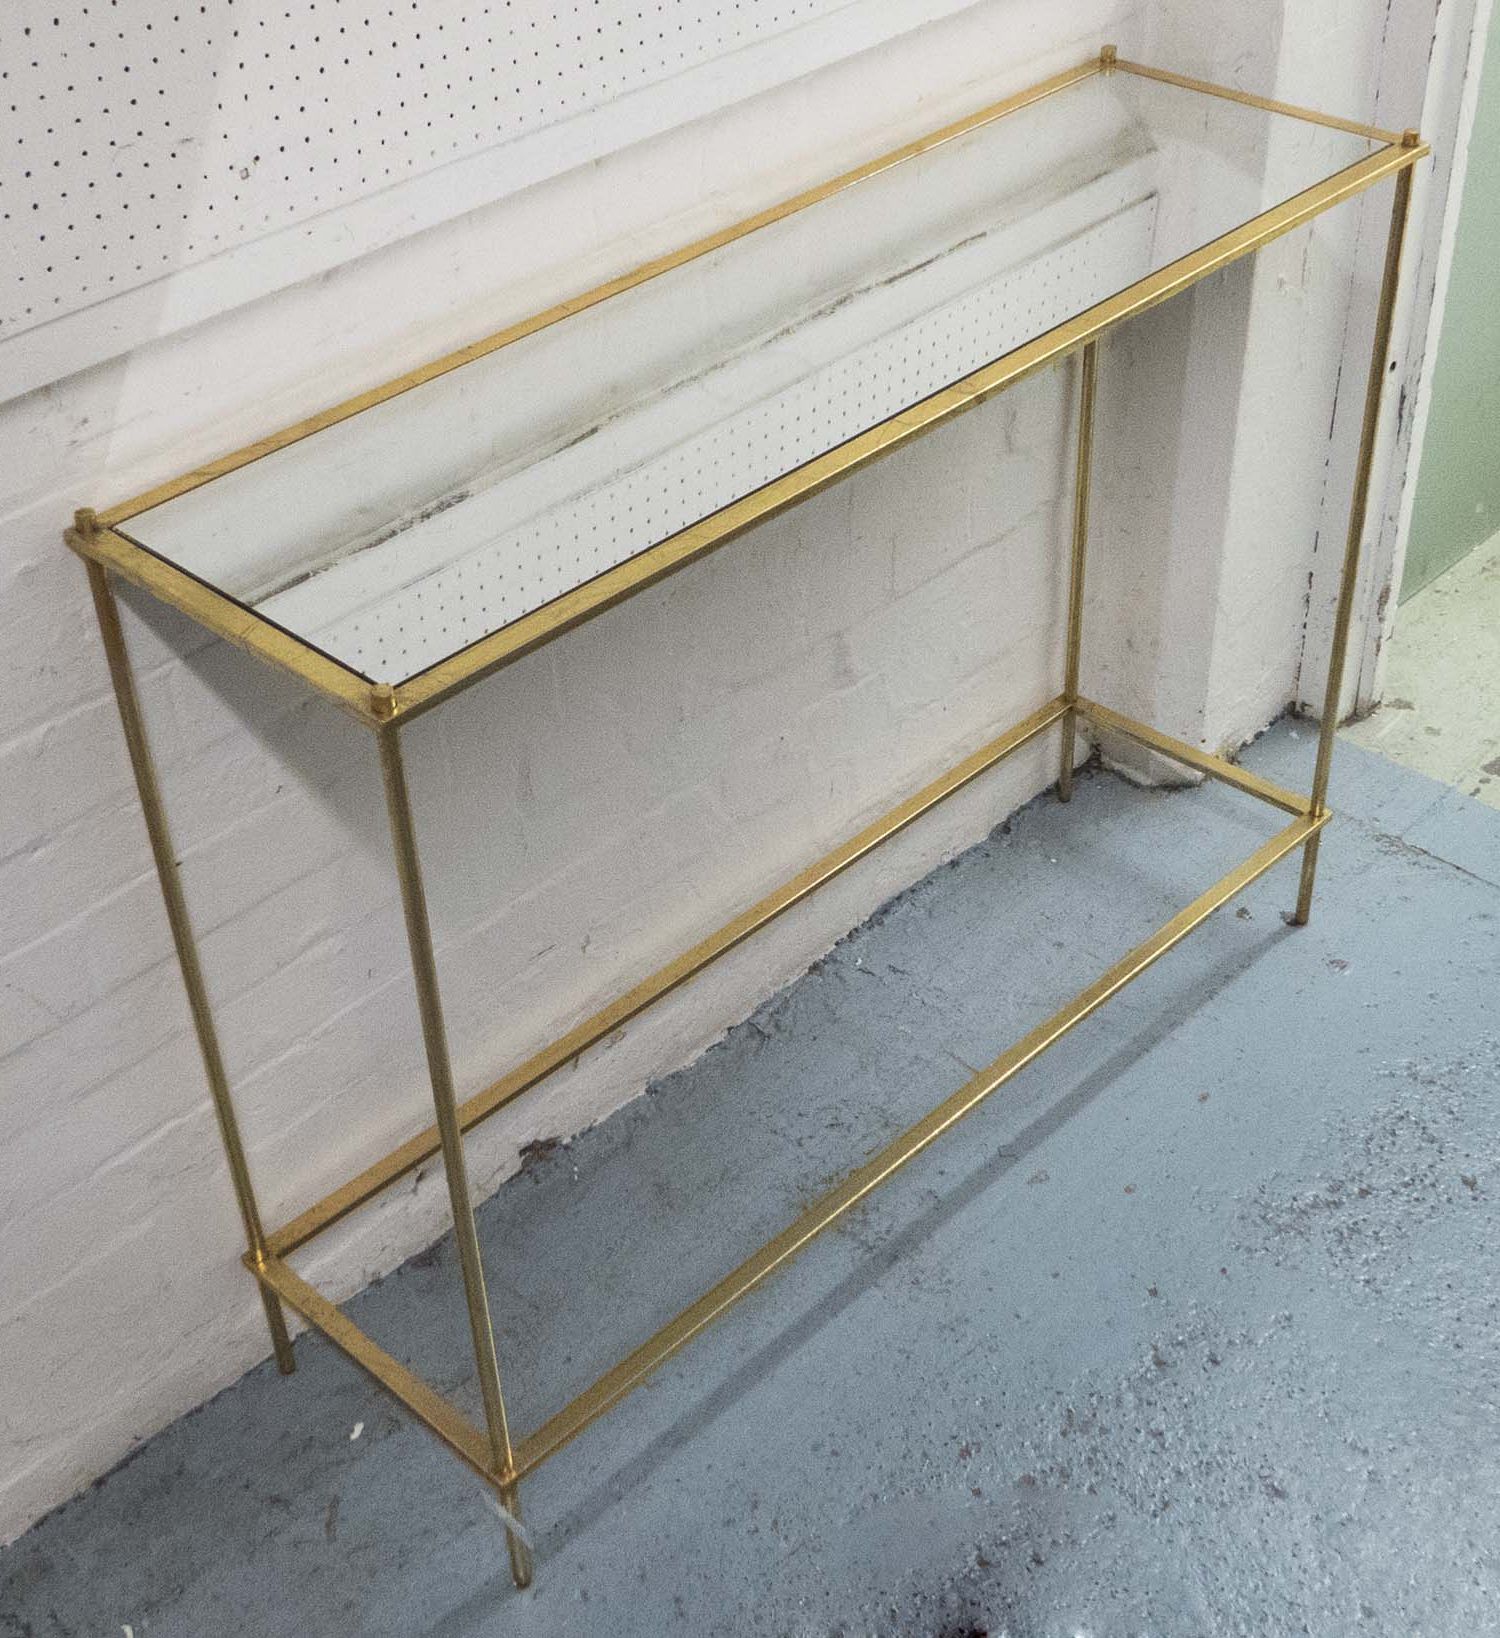 Mirrored Console Tables Intended For Latest Mirrored Console Table, In A Gilded Metal Frame, 108cm X (View 10 of 10)